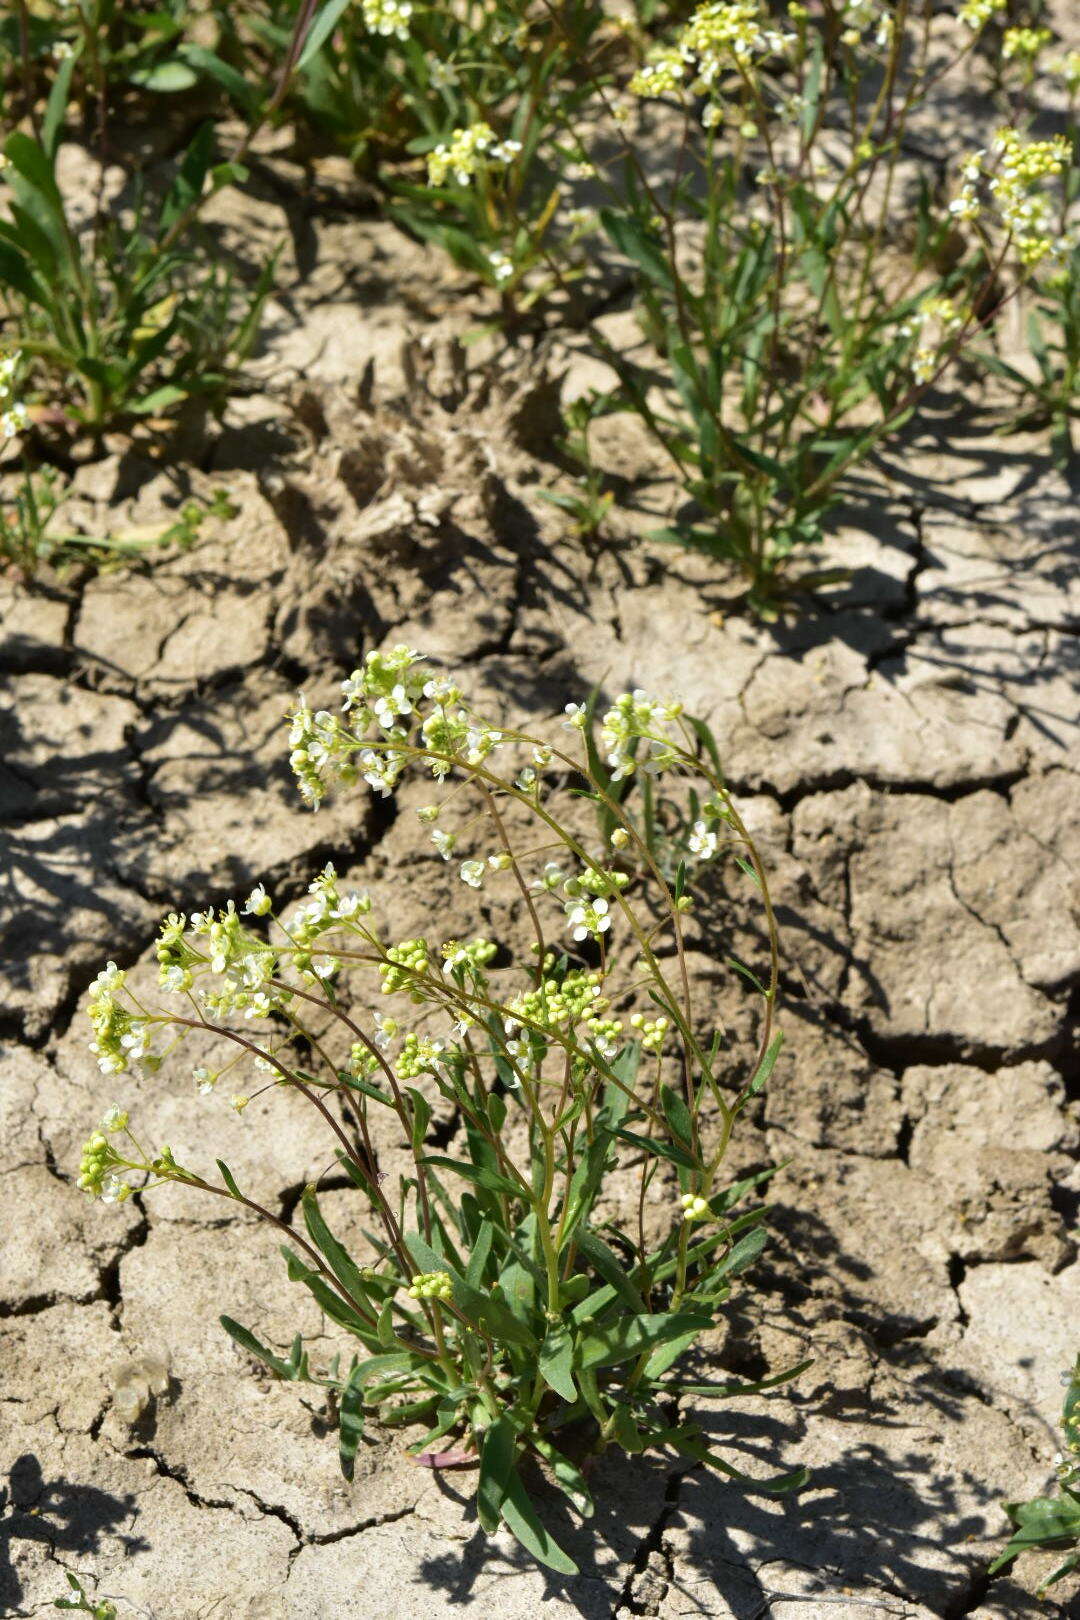 Image of Panoche pepperweed